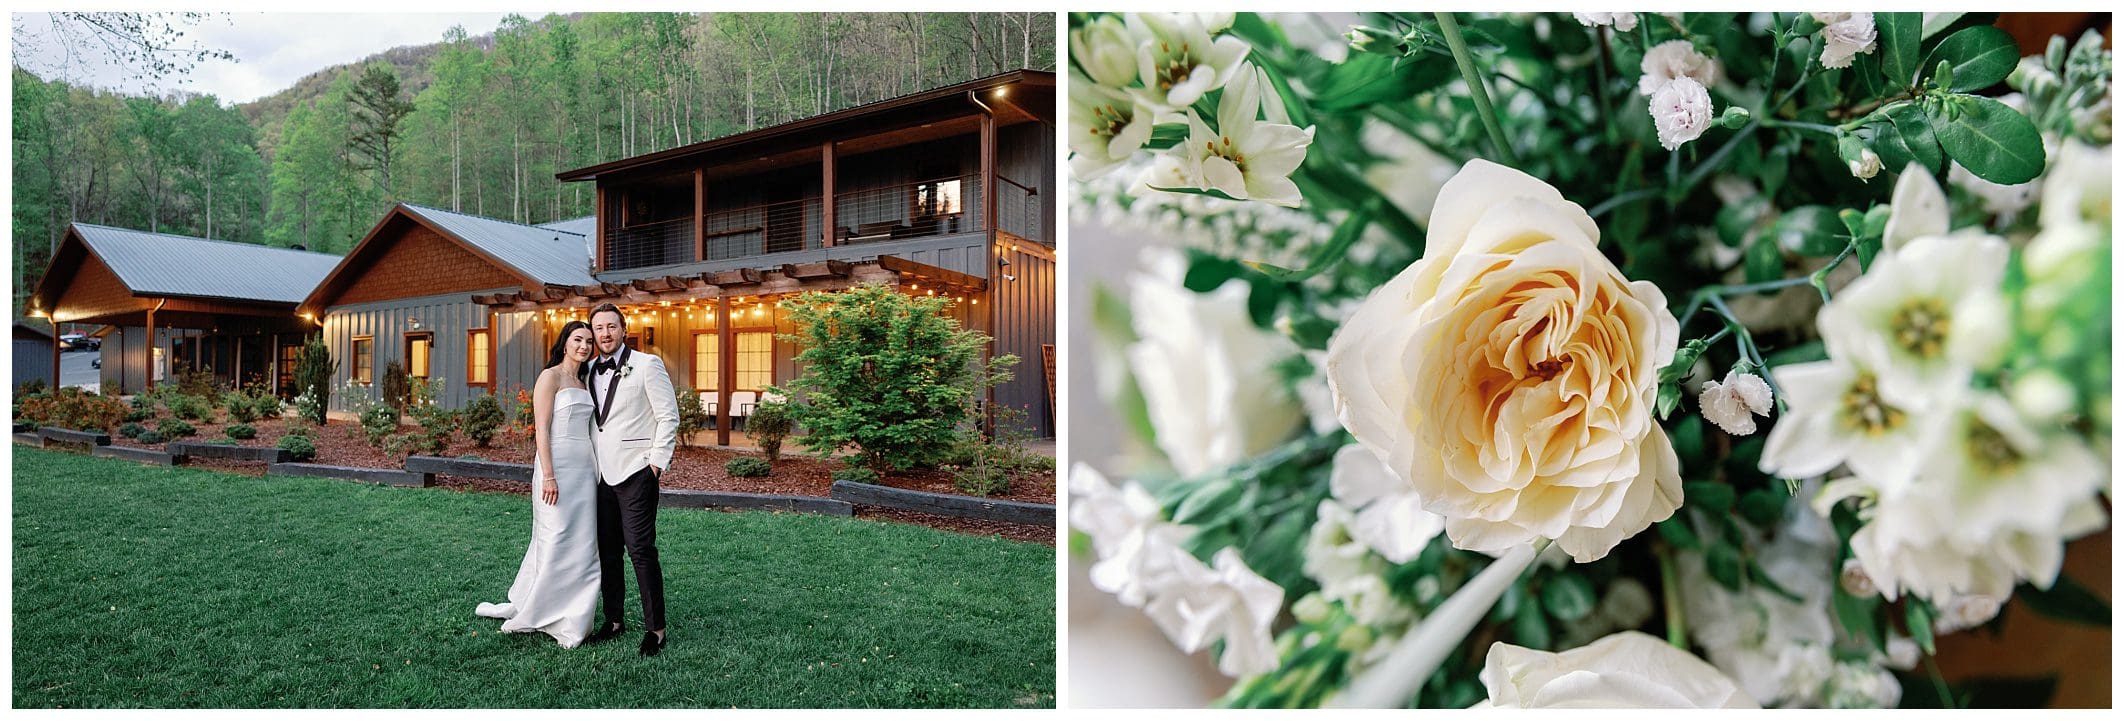 Intimate Spring Microwedding at Parker Mill , newlywed couple embracing on a lawn in front of a well-lit house with woods in the background, adjacent to a close-up of pale white roses.